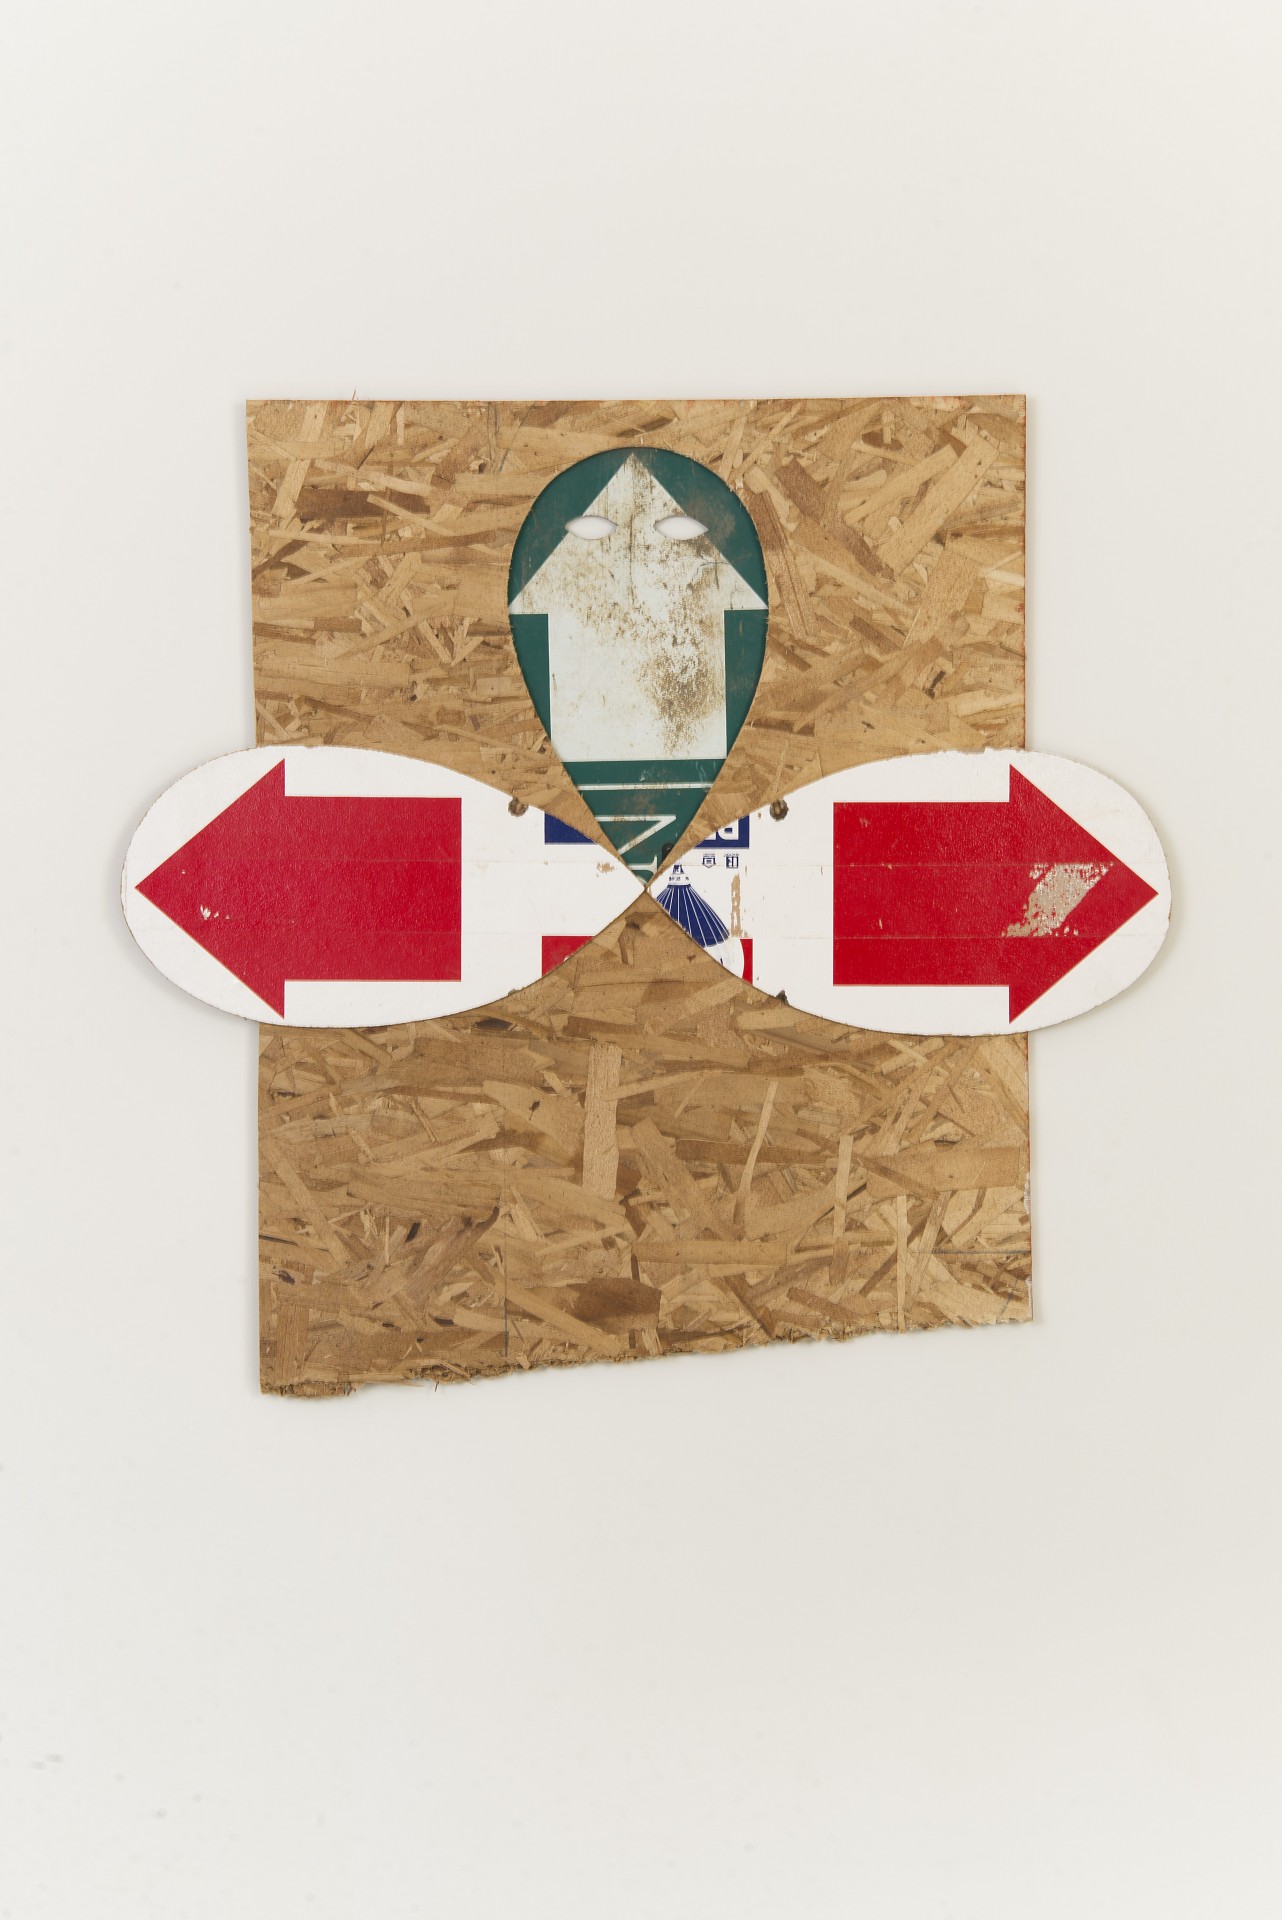 Michael Lazarus, *no title (arrows)*, 2014. Found signage and wood 